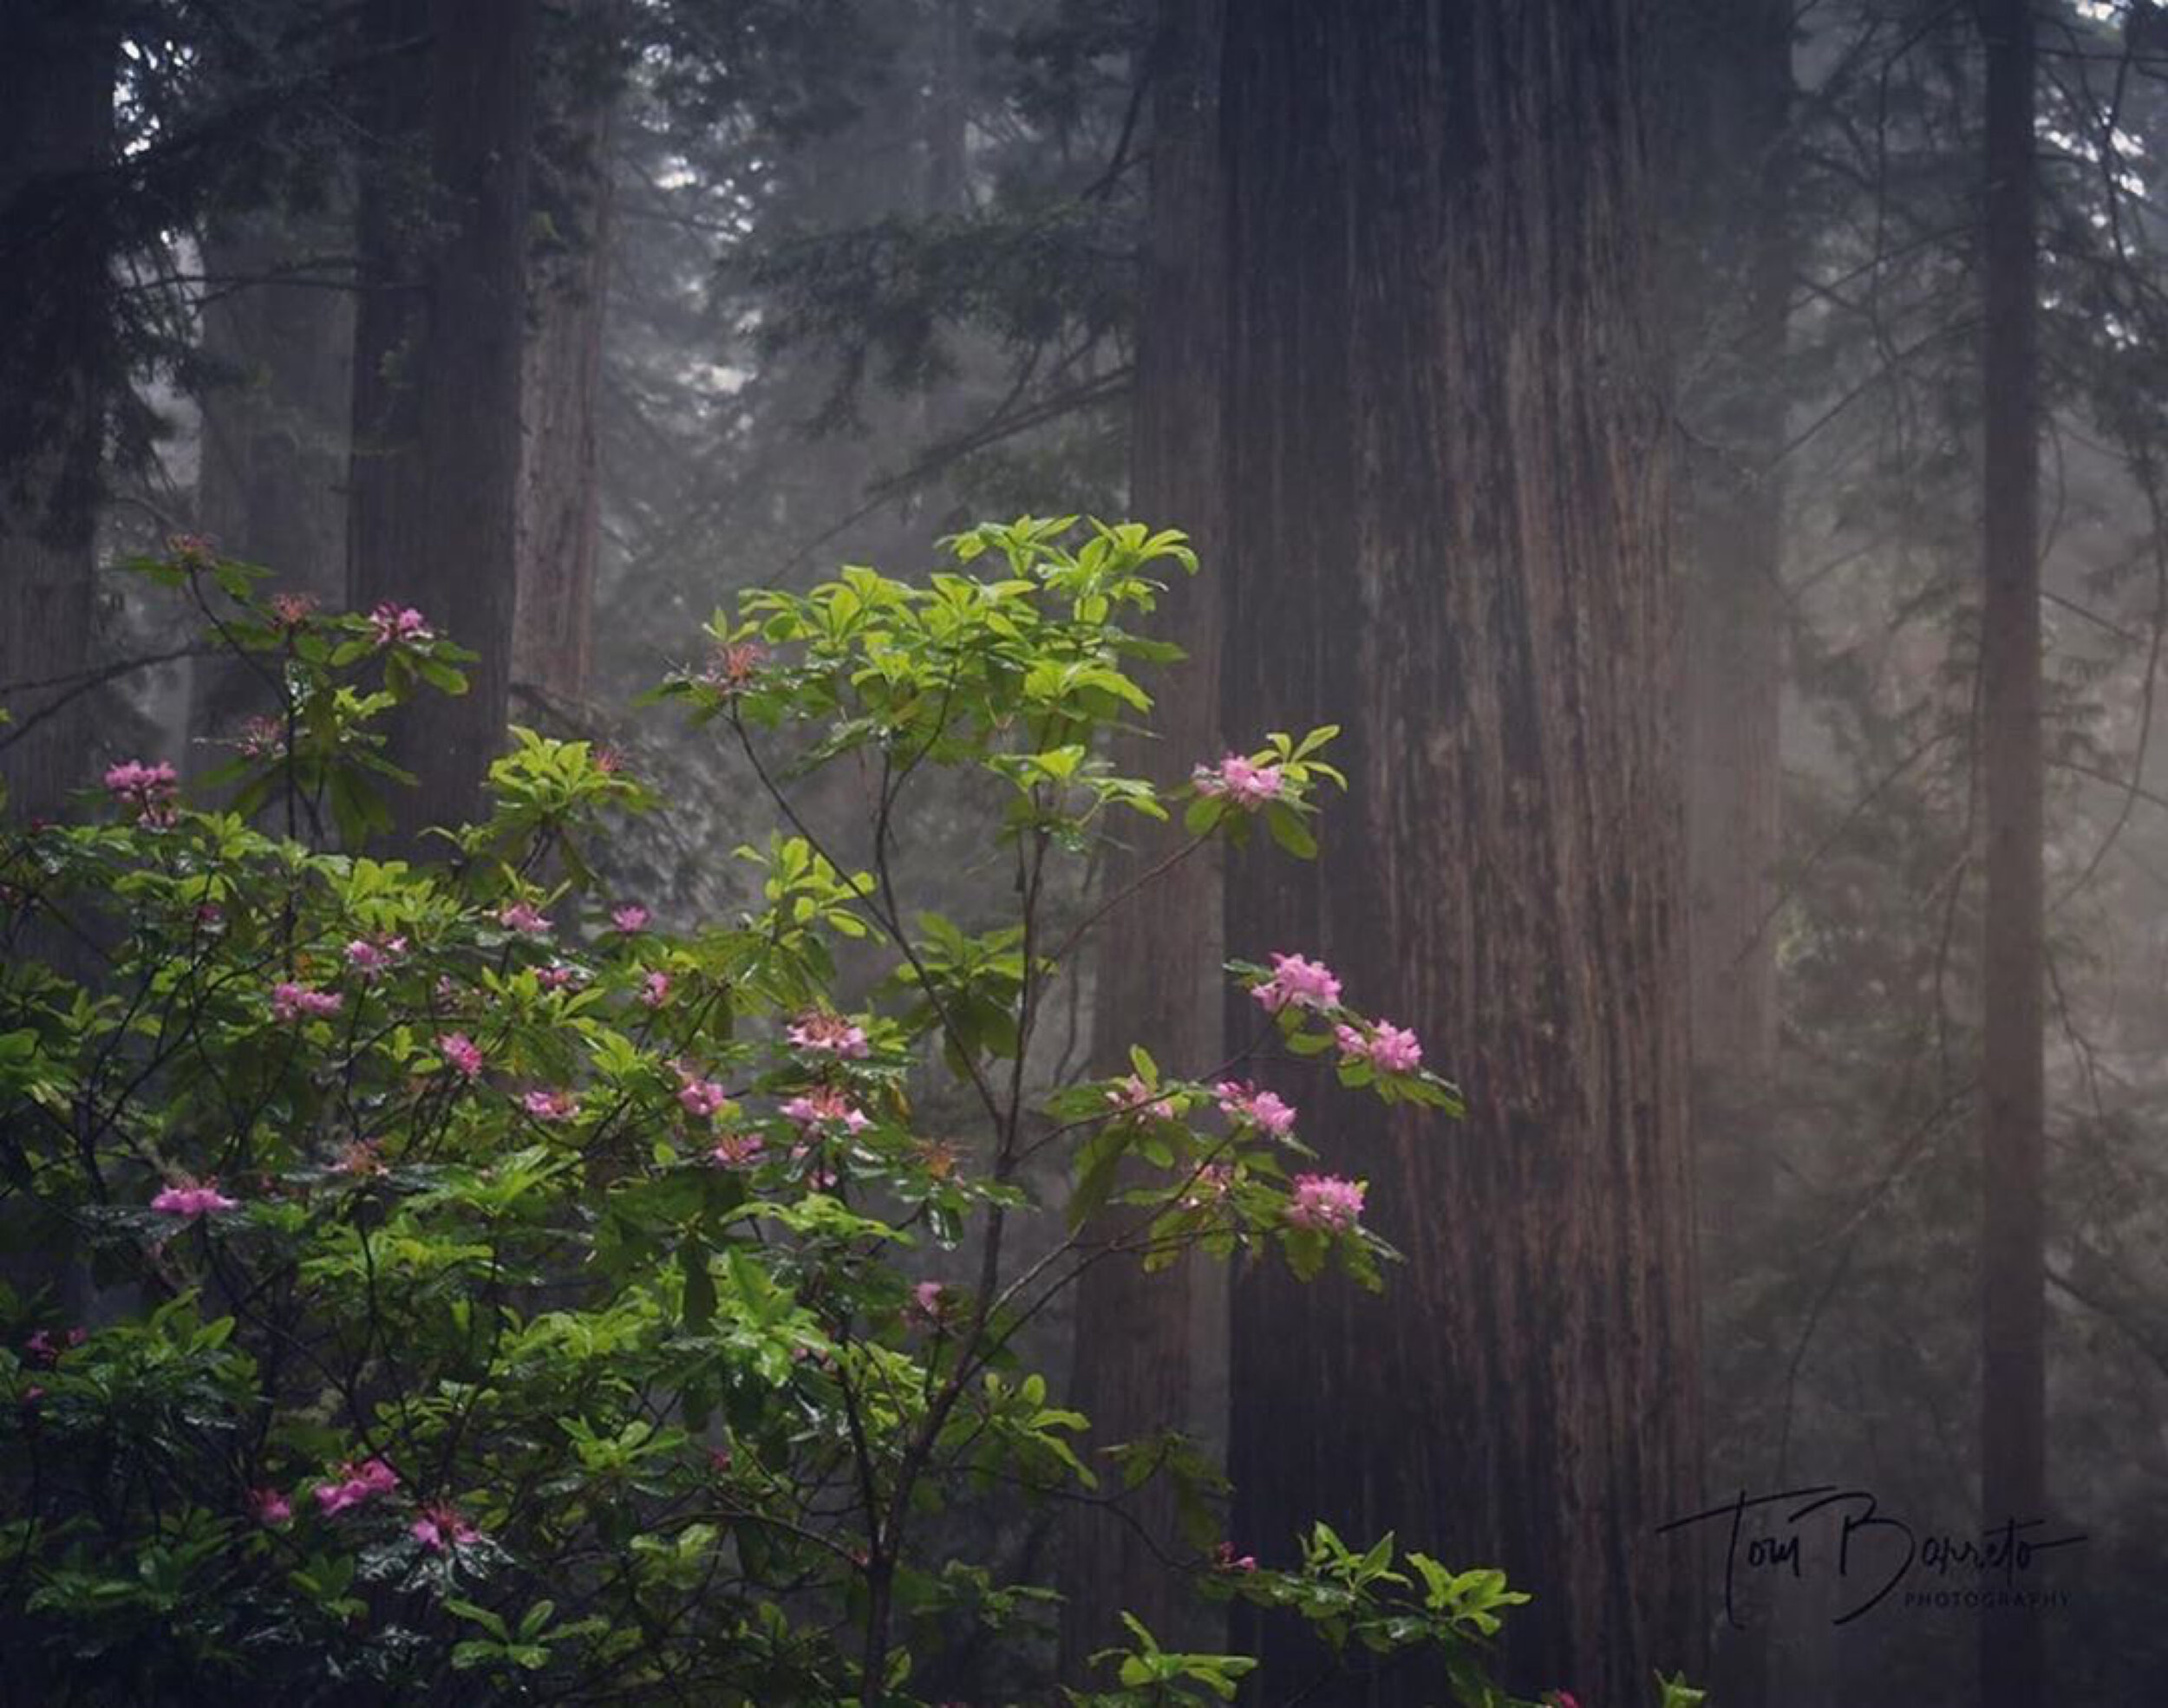 California Redwoods Rhododendron by Photography Workshop Student